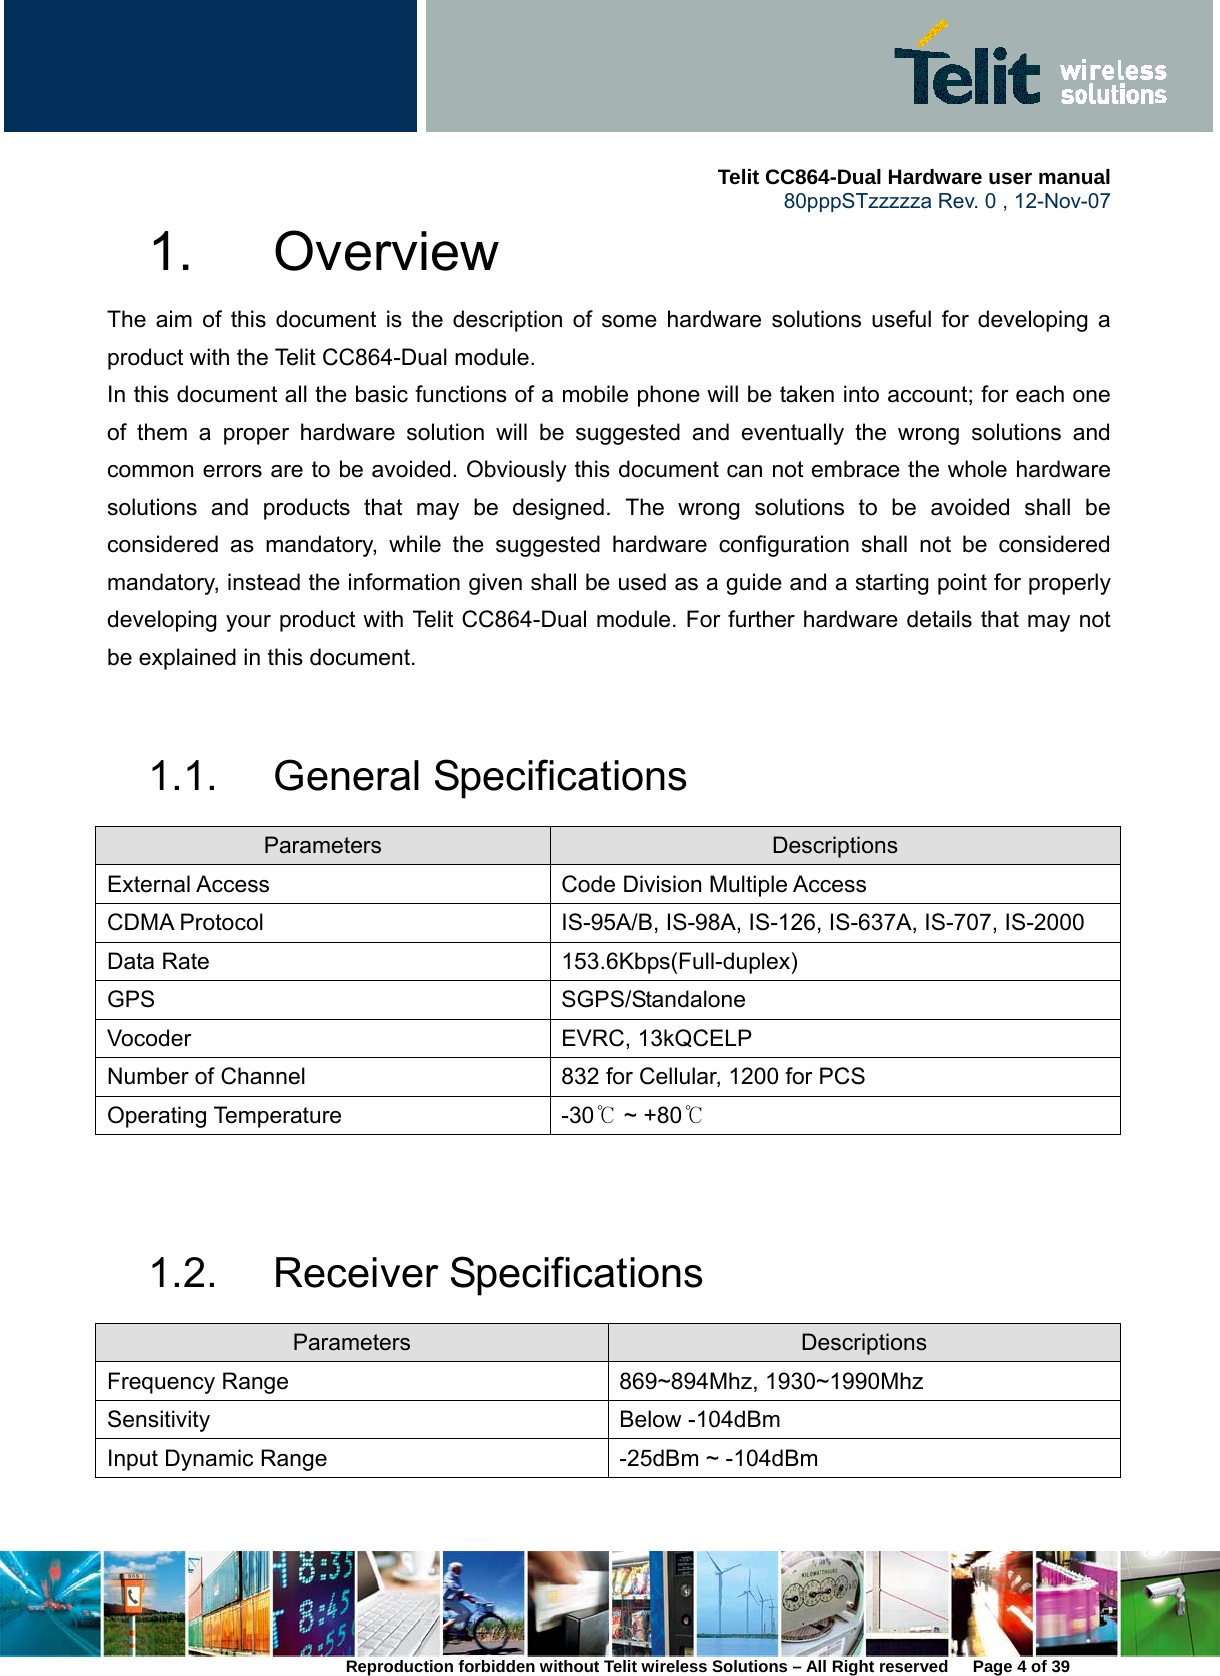     Telit CC864-Dual Hardware user manual   80pppSTzzzzza Rev. 0 , 12-Nov-07 Reproduction forbidden without Telit wireless Solutions – All Right reserved      Page 4 of 39 1. Overview The aim of this document is the description of some hardware solutions useful for developing a product with the Telit CC864-Dual module. In this document all the basic functions of a mobile phone will be taken into account; for each one of them a proper hardware solution will be suggested and eventually the wrong solutions and common errors are to be avoided. Obviously this document can not embrace the whole hardware solutions and products that may be designed. The wrong solutions to be avoided shall be considered as mandatory, while the suggested hardware configuration shall not be considered mandatory, instead the information given shall be used as a guide and a starting point for properly developing your product with Telit CC864-Dual module. For further hardware details that may not be explained in this document.  1.1. General Specifications Parameters  Descriptions External Access  Code Division Multiple Access CDMA Protocol  IS-95A/B, IS-98A, IS-126, IS-637A, IS-707, IS-2000 Data Rate  153.6Kbps(Full-duplex) GPS SGPS/Standalone Vocoder EVRC, 13kQCELP Number of Channel  832 for Cellular, 1200 for PCS Operating Temperature  -30℃ ~ +80℃   1.2. Receiver Specifications Parameters  Descriptions Frequency Range  869~894Mhz, 1930~1990Mhz Sensitivity Below -104dBm Input Dynamic Range  -25dBm ~ -104dBm  